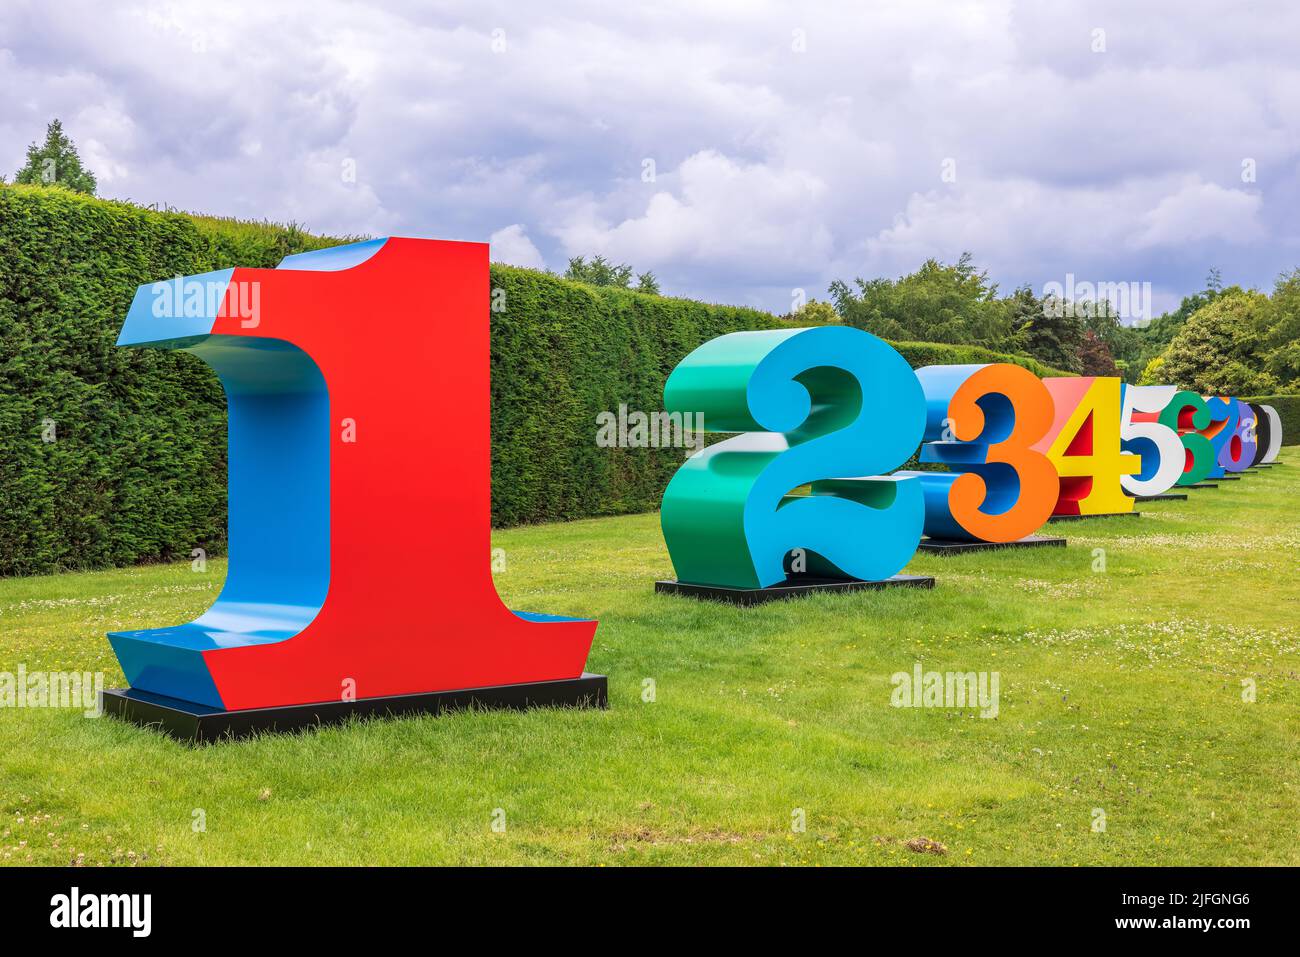 ONE Through ZERO (The Ten Numbers), 1980-2001 sculpture by American artist Robert Indiana, as displayed at the YSP near Wakefield, UK. Stock Photo